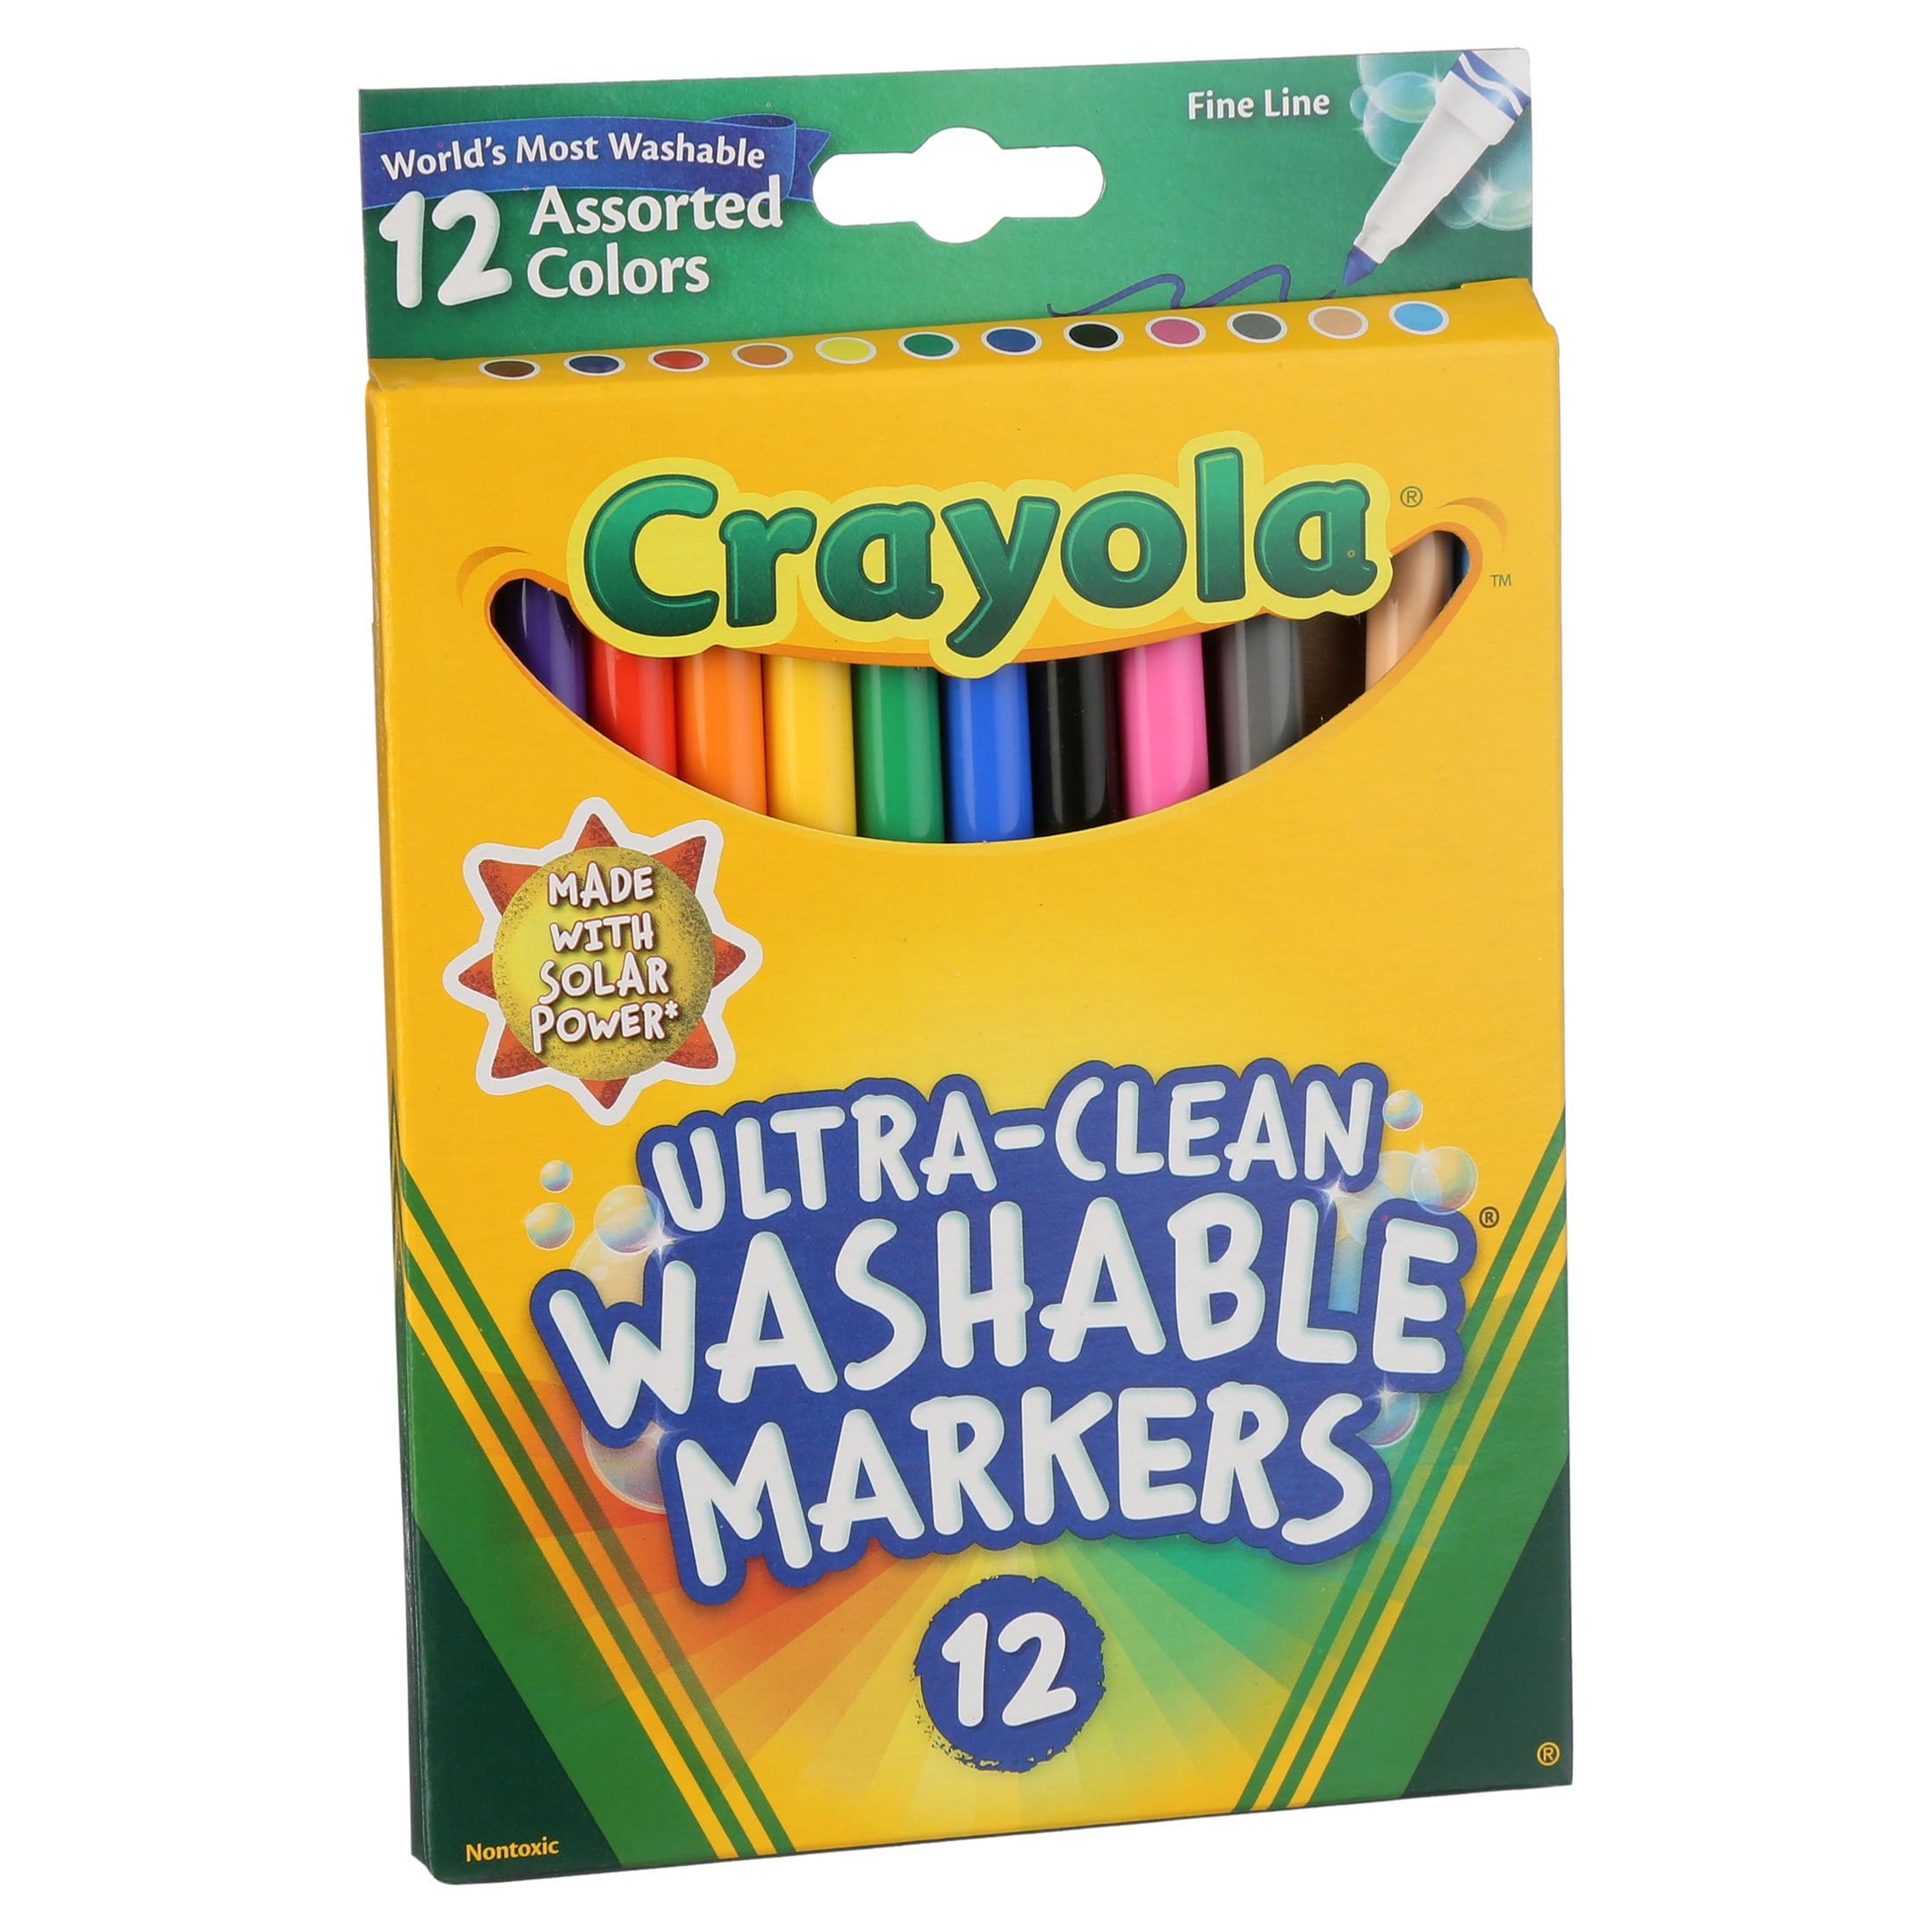 Washable Markers,16 Different Colors and Bonus 12 Caps - Set of 304